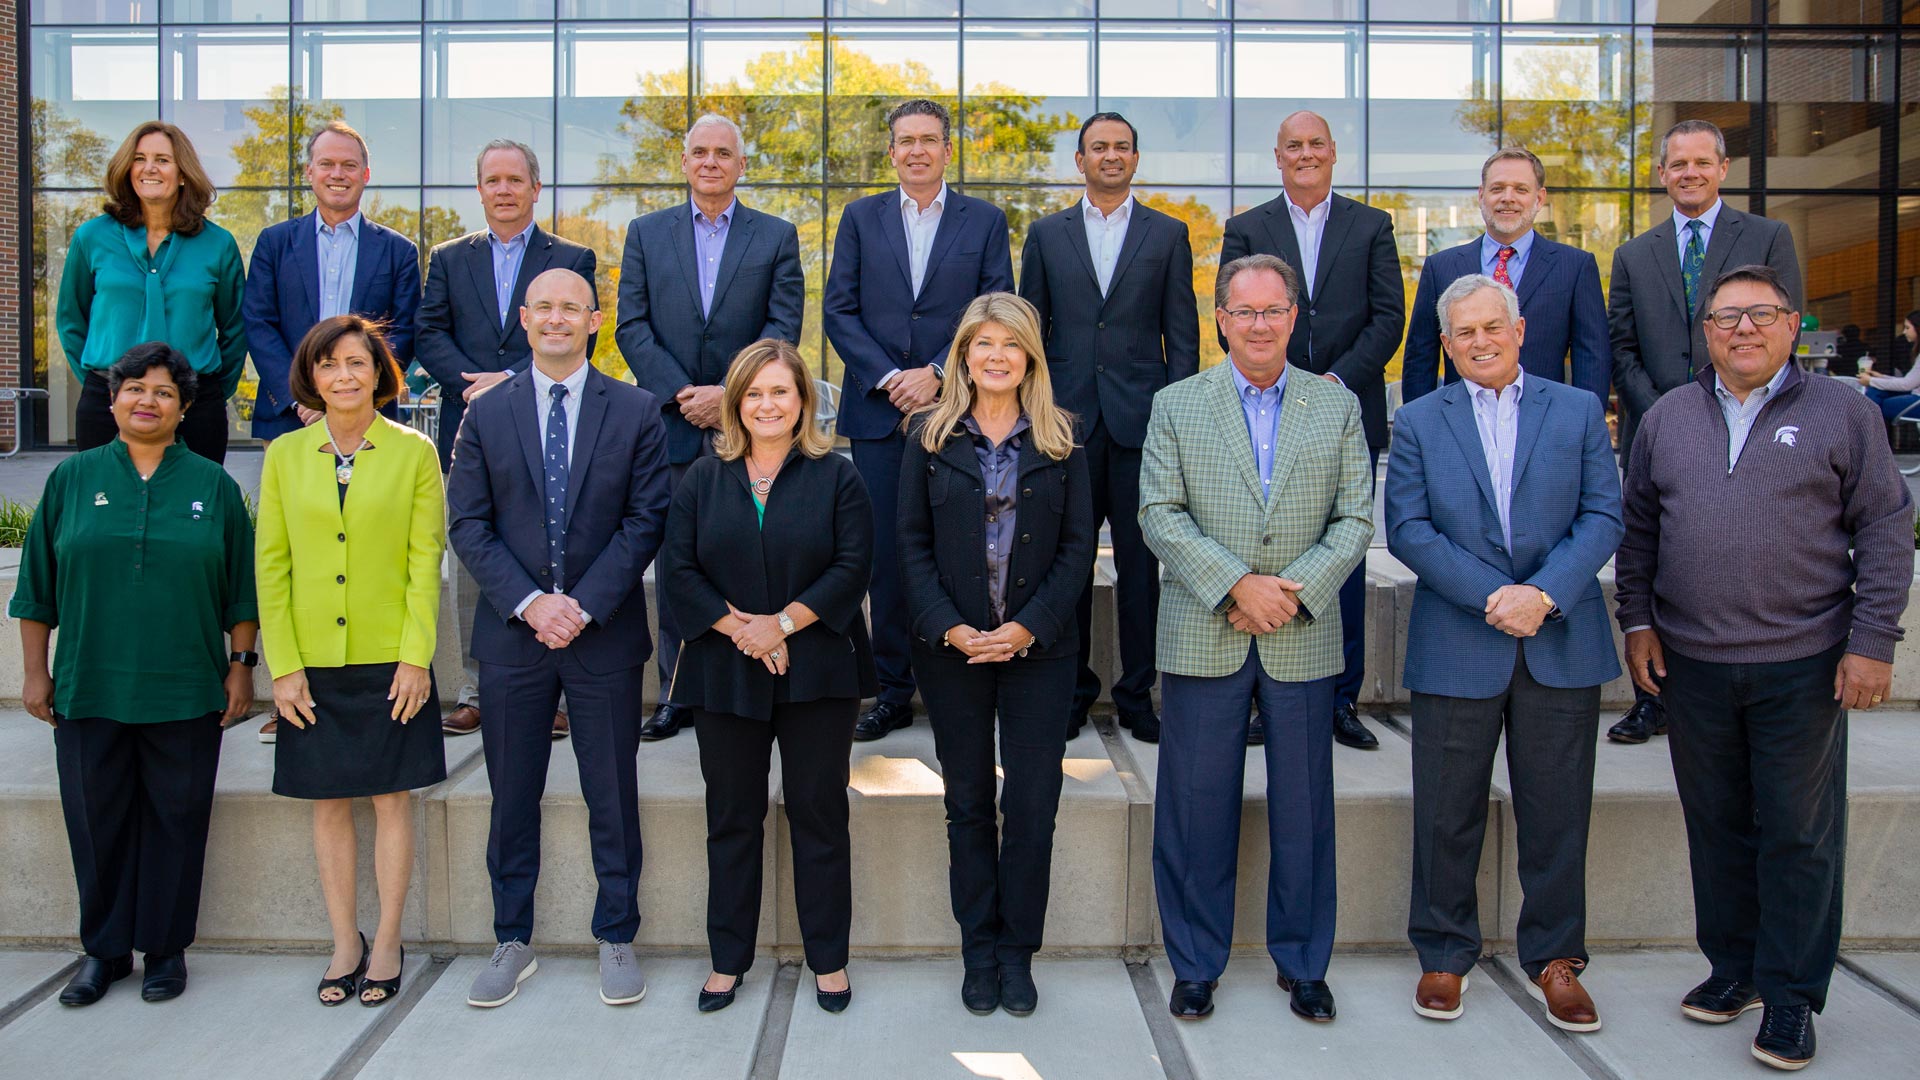 The 2021-22 Broad College Advisory Board poses for a group photo